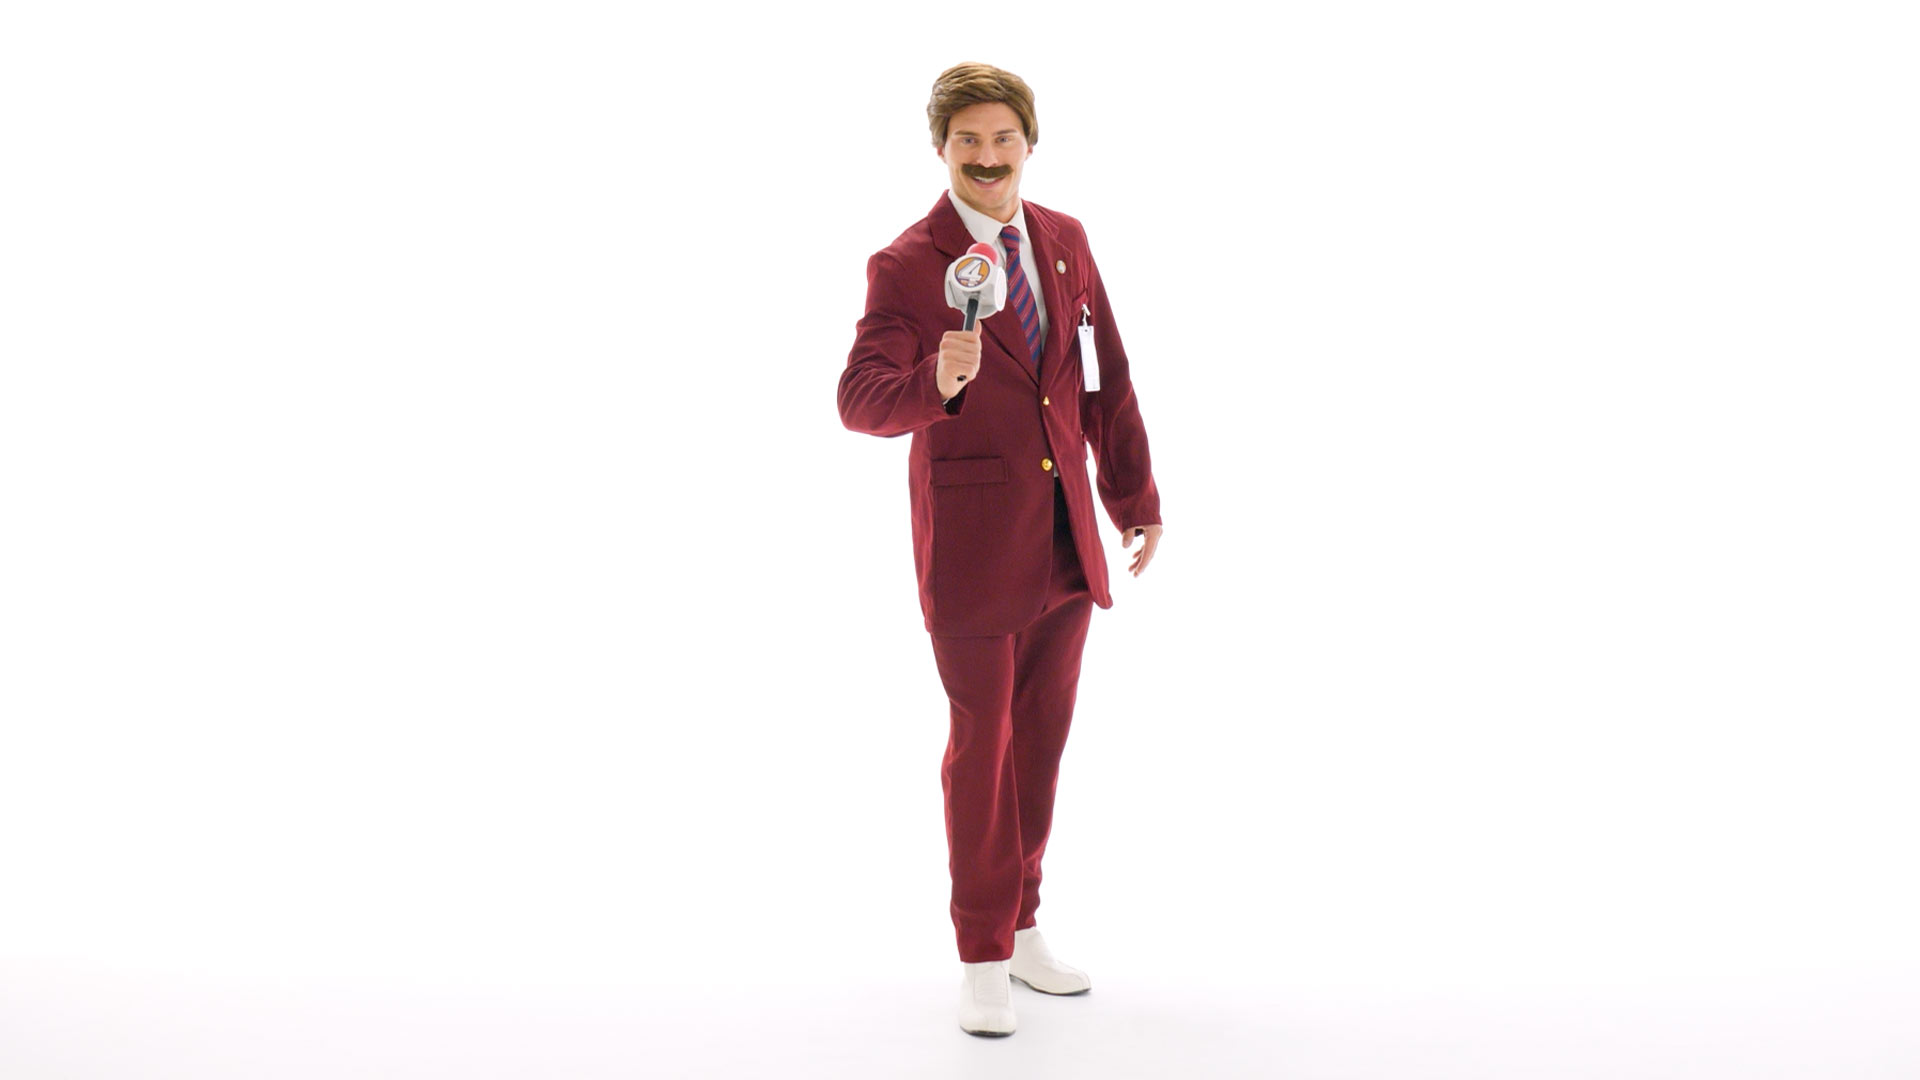 This Deluxe Ron Burgundy Suit will have you looking just like the handsome star of The Anchorman movies.